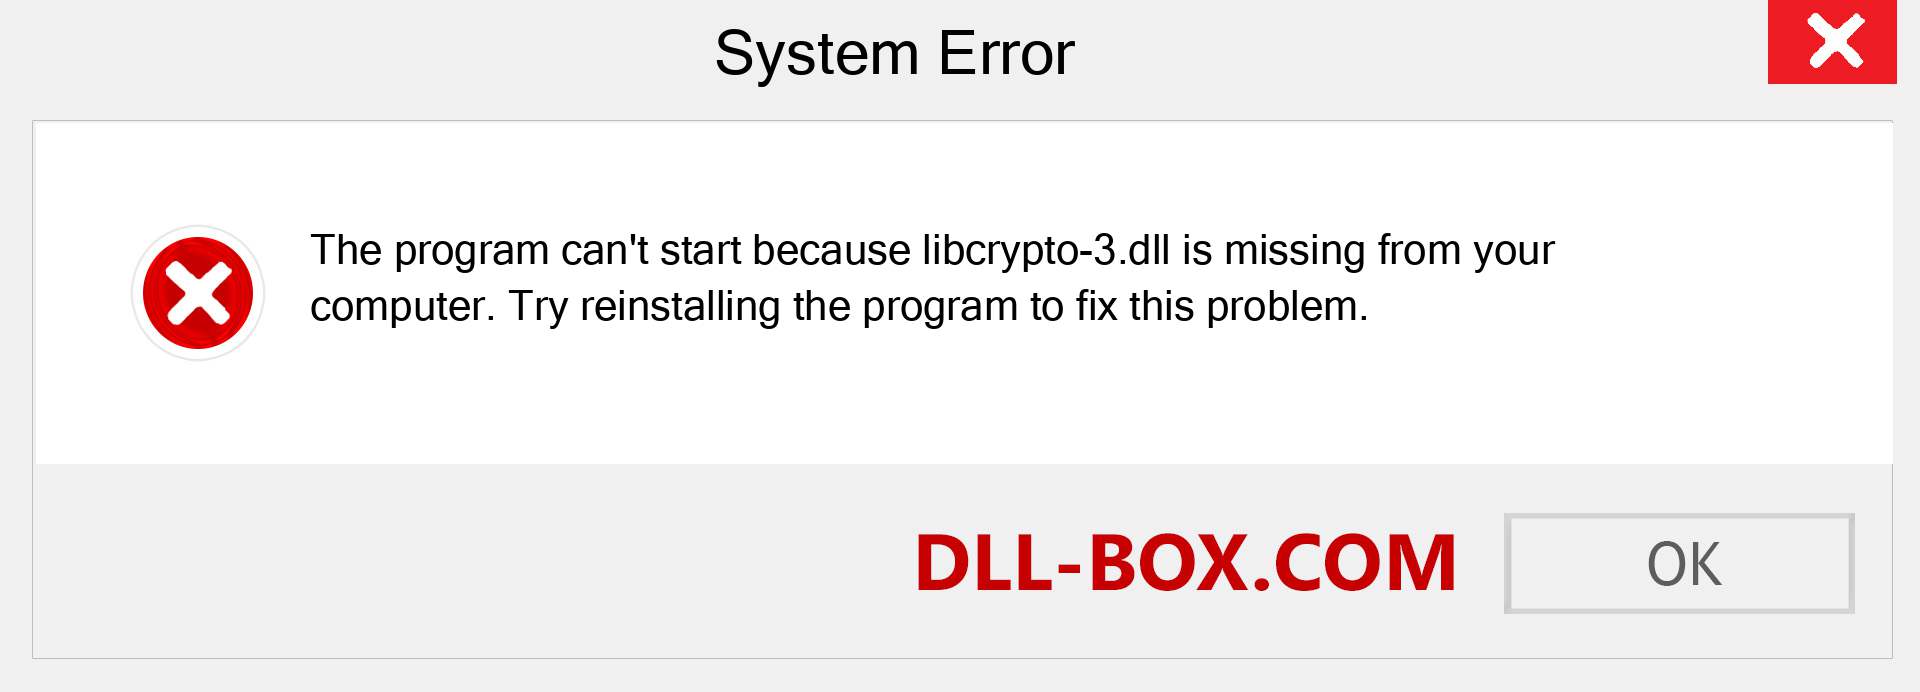  libcrypto-3.dll file is missing?. Download for Windows 7, 8, 10 - Fix  libcrypto-3 dll Missing Error on Windows, photos, images